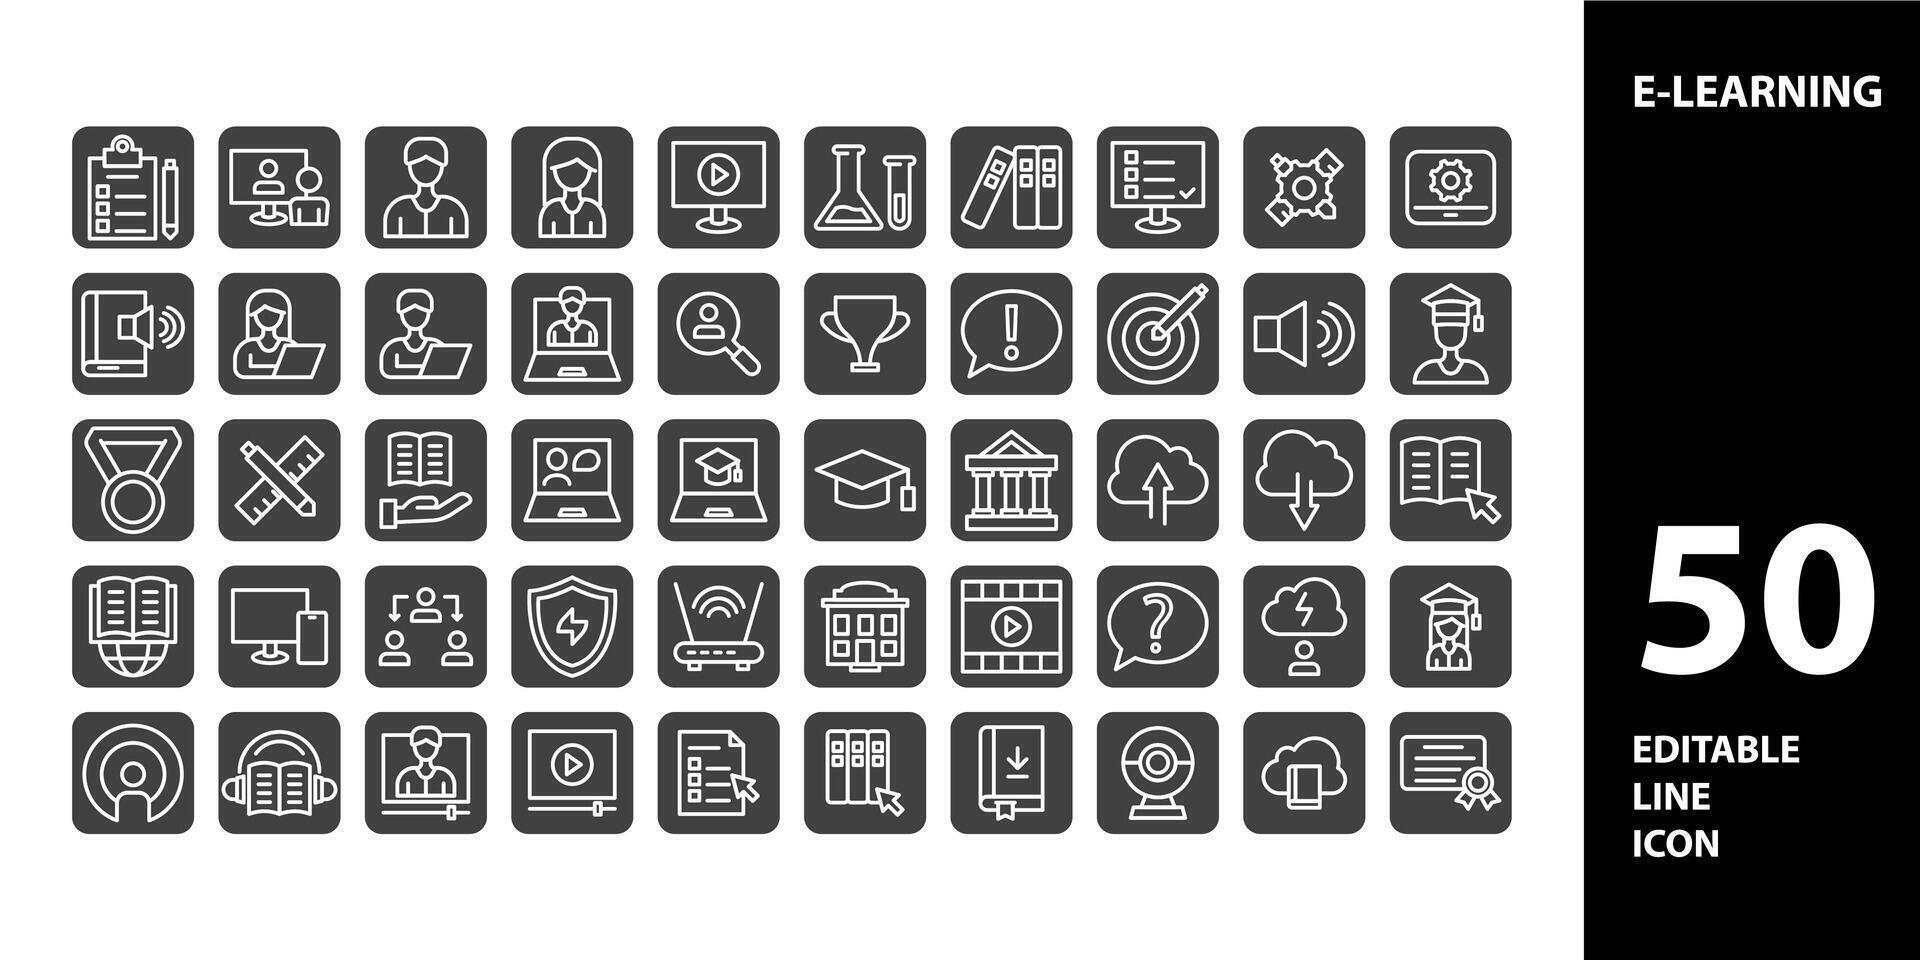 E-learning icons set. Collection of simple editable icons for web design, app, and more. vector